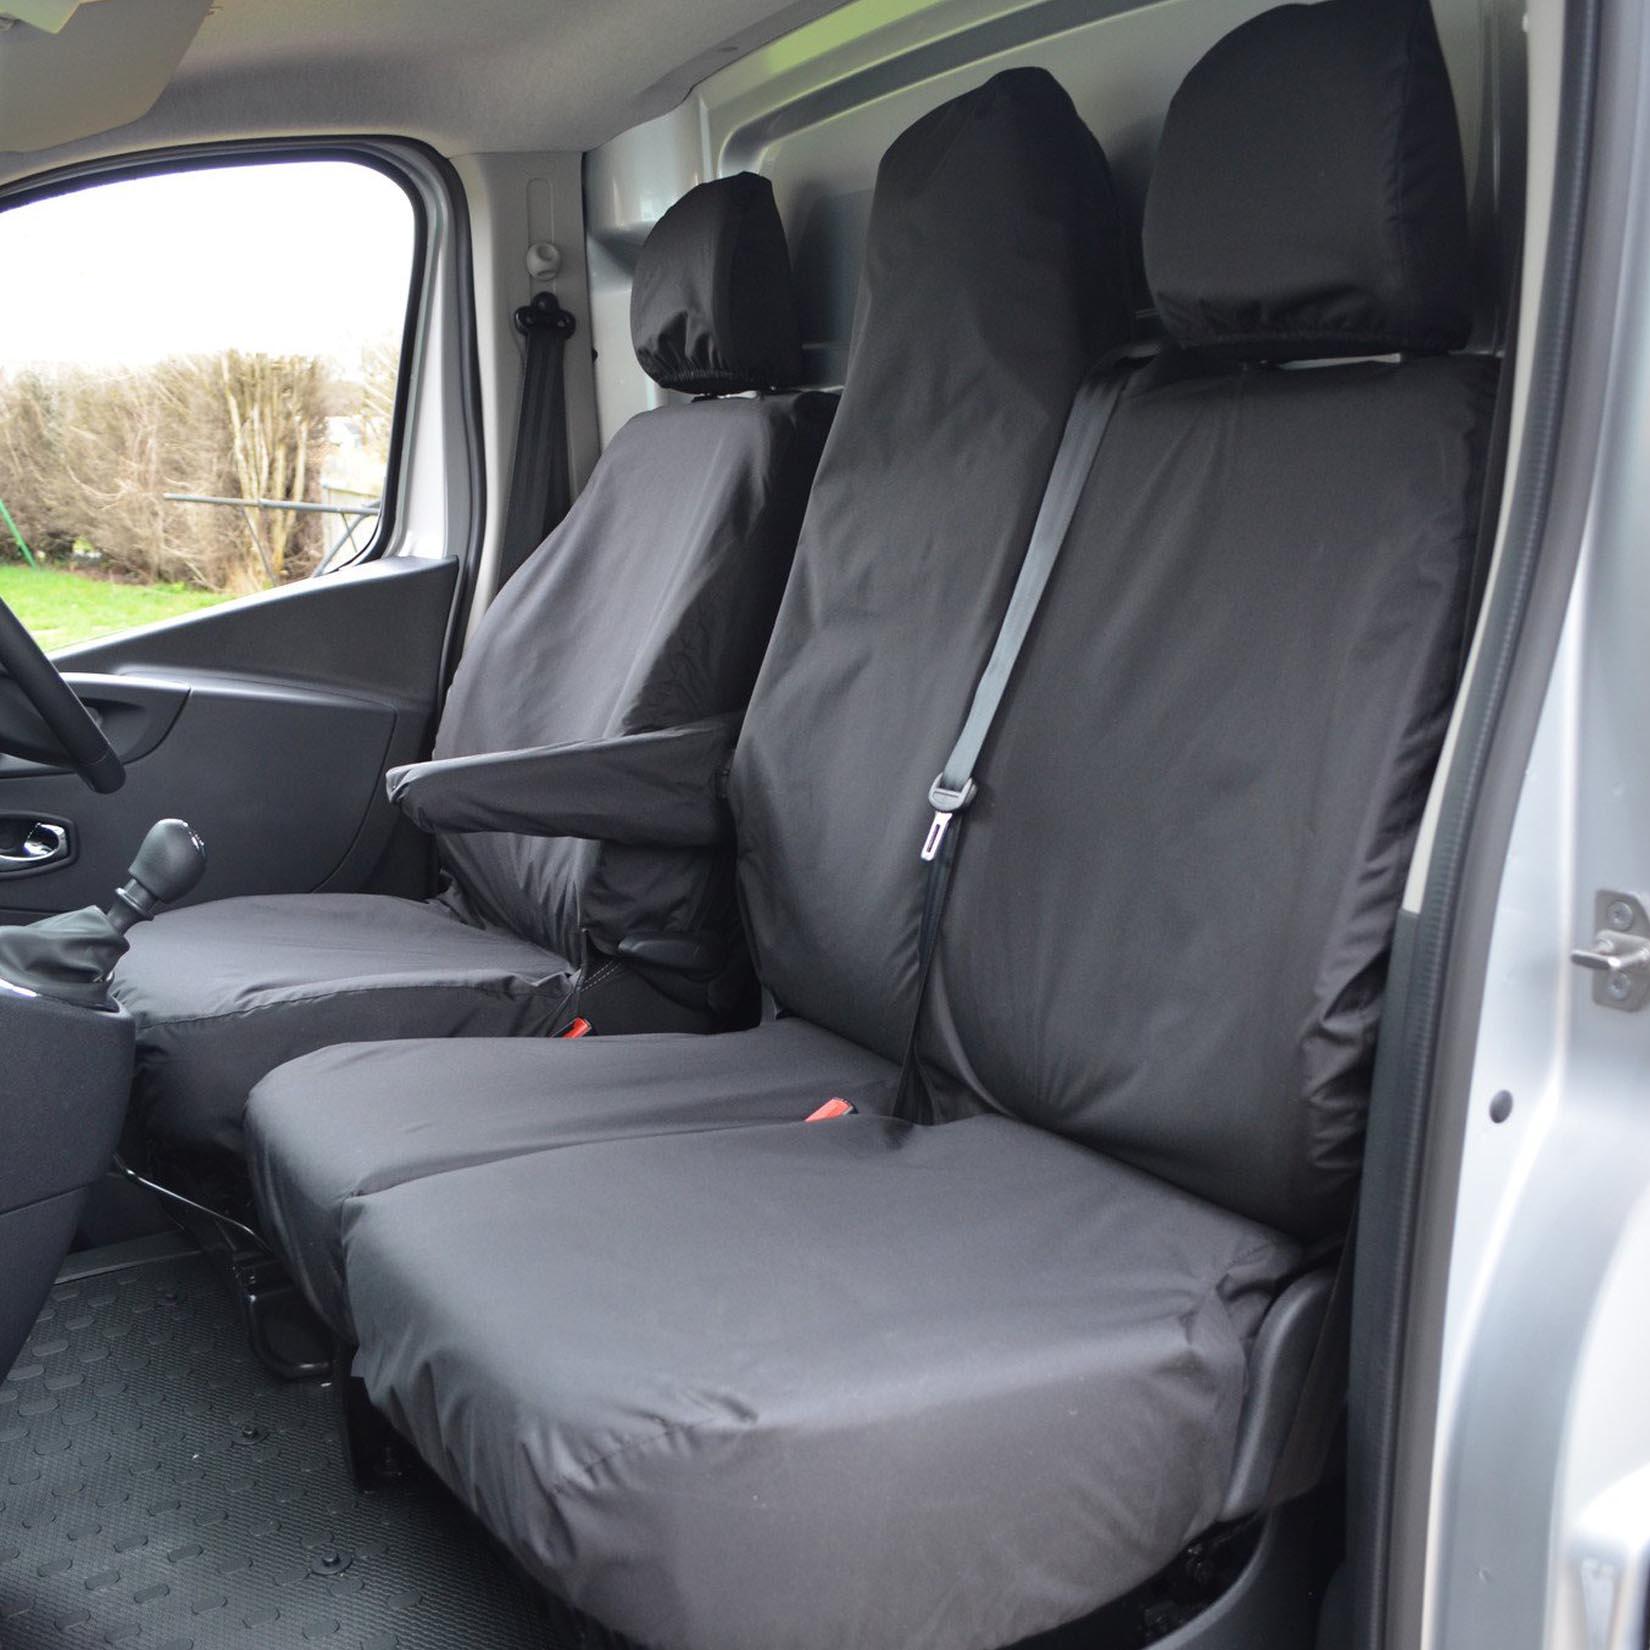 RENAULT TRAFIC 2014 ON - VAUXHALL VIVARO 2014-2019 - TAILORED FRONT FOLDING SEATS SEAT COVERS - BLACK - Storm Xccessories2